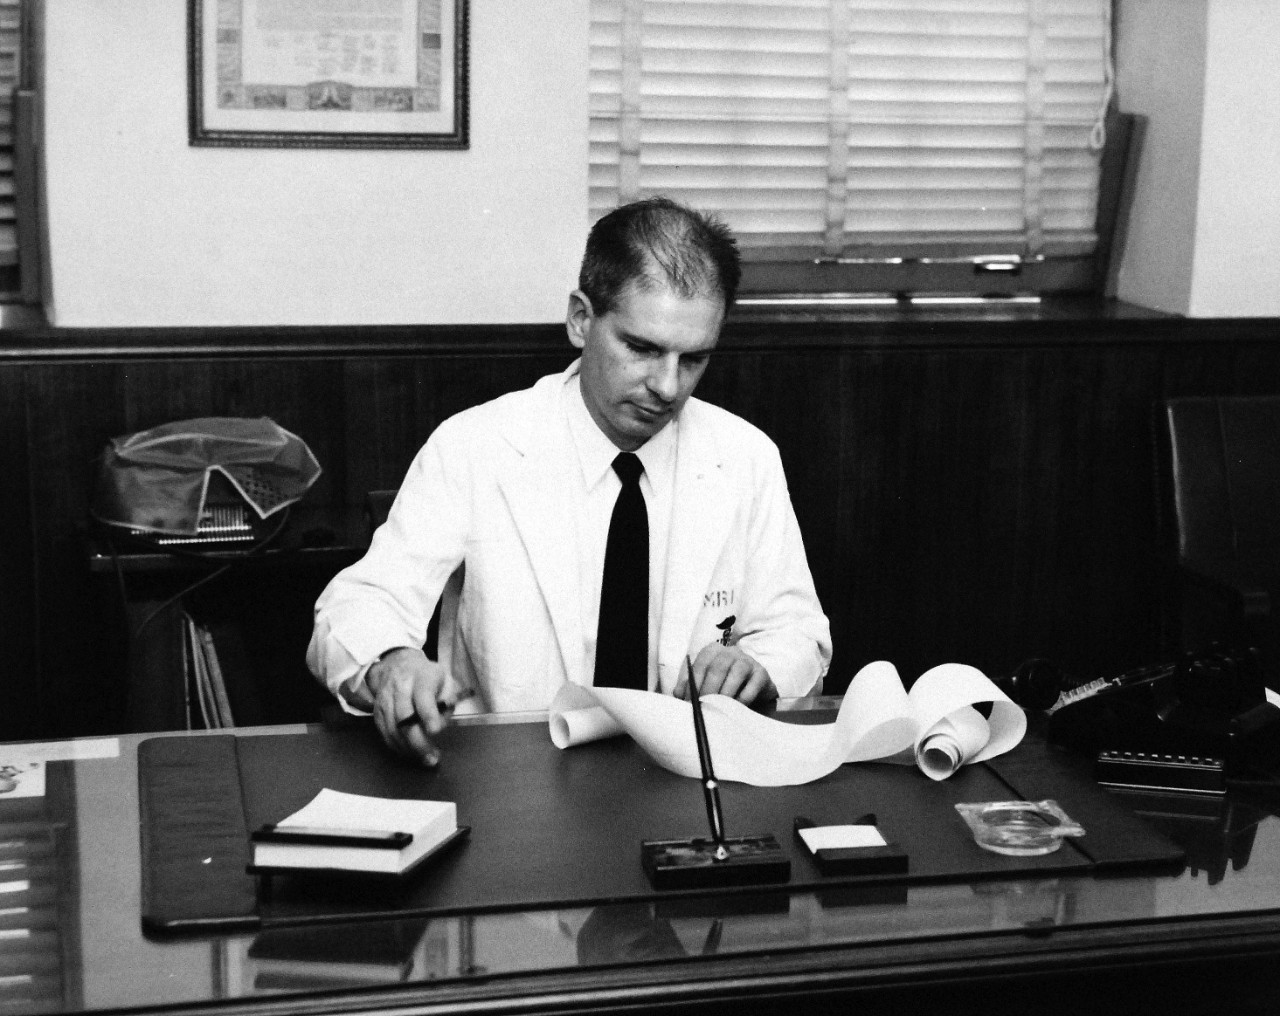 330-PS-8850-3:  U.S. Navy Conducts Physical Studies By Telephone.  Captain Jack P. Pollard, MC, USN, examines permanent record of physiological information transmitted over telephone circuit, March 21, 1958.  Official Department of Defense photograph, now in the collection of the National Archives.   